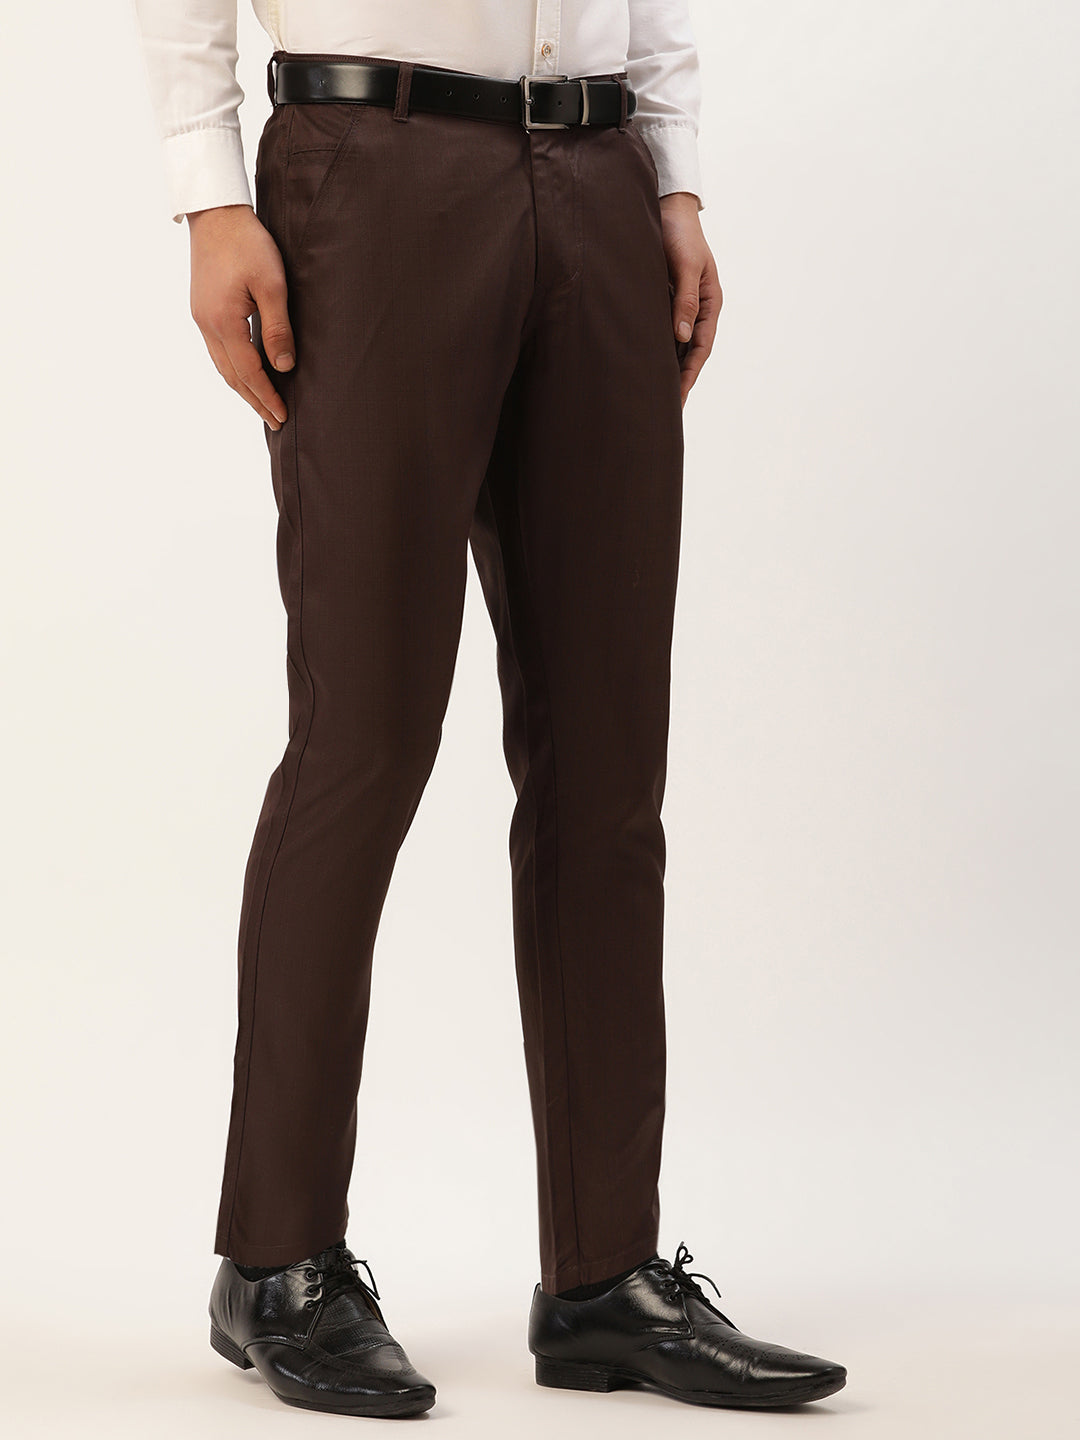 Jainish Men's Coffee Checked Formal Trousers